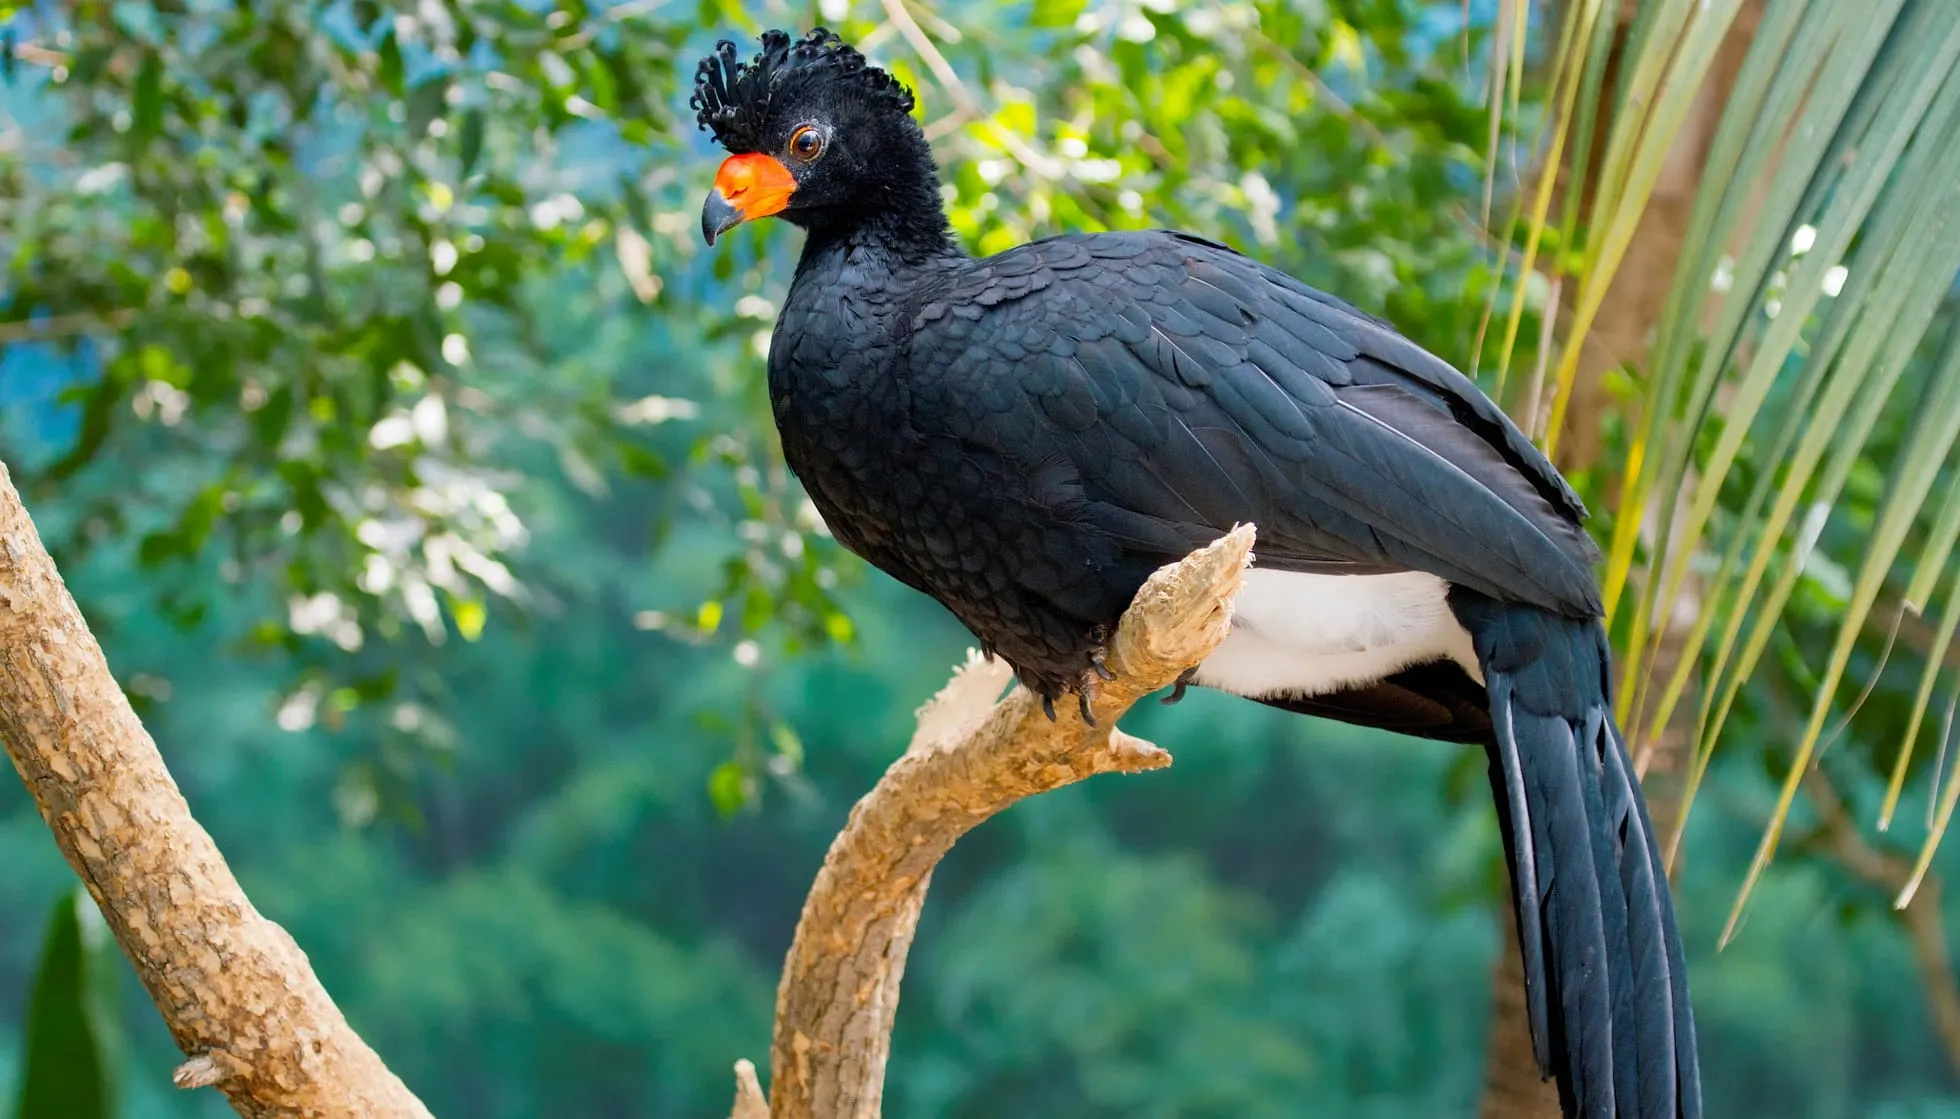 Wattled Curassow Perched On Branch